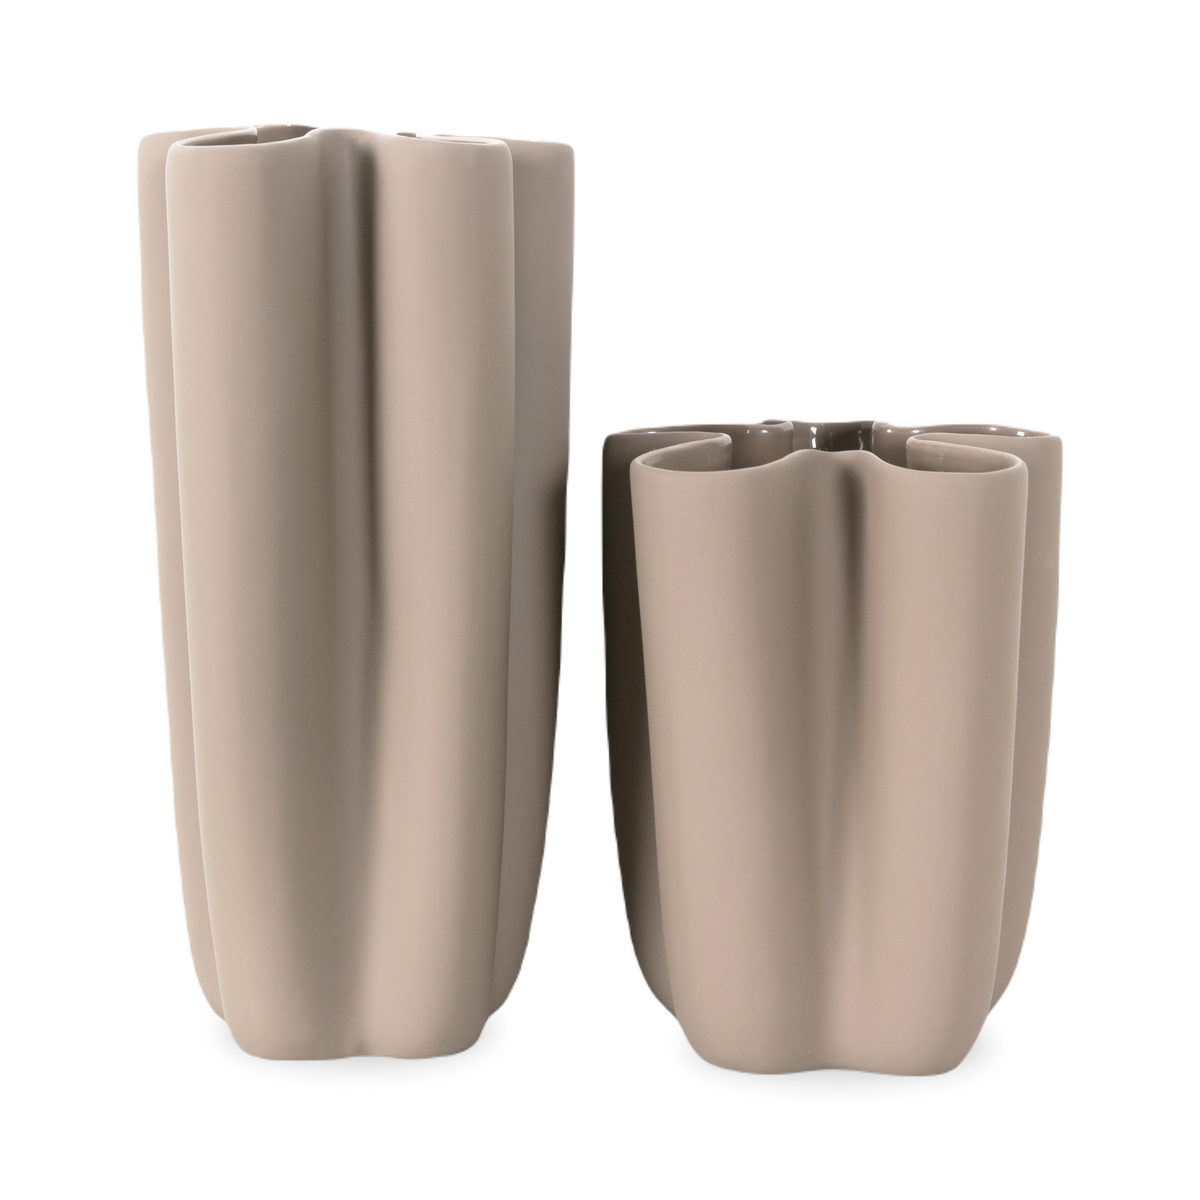 The Tulipa Vase has a matt, soft surface and features a memorable organic shape.